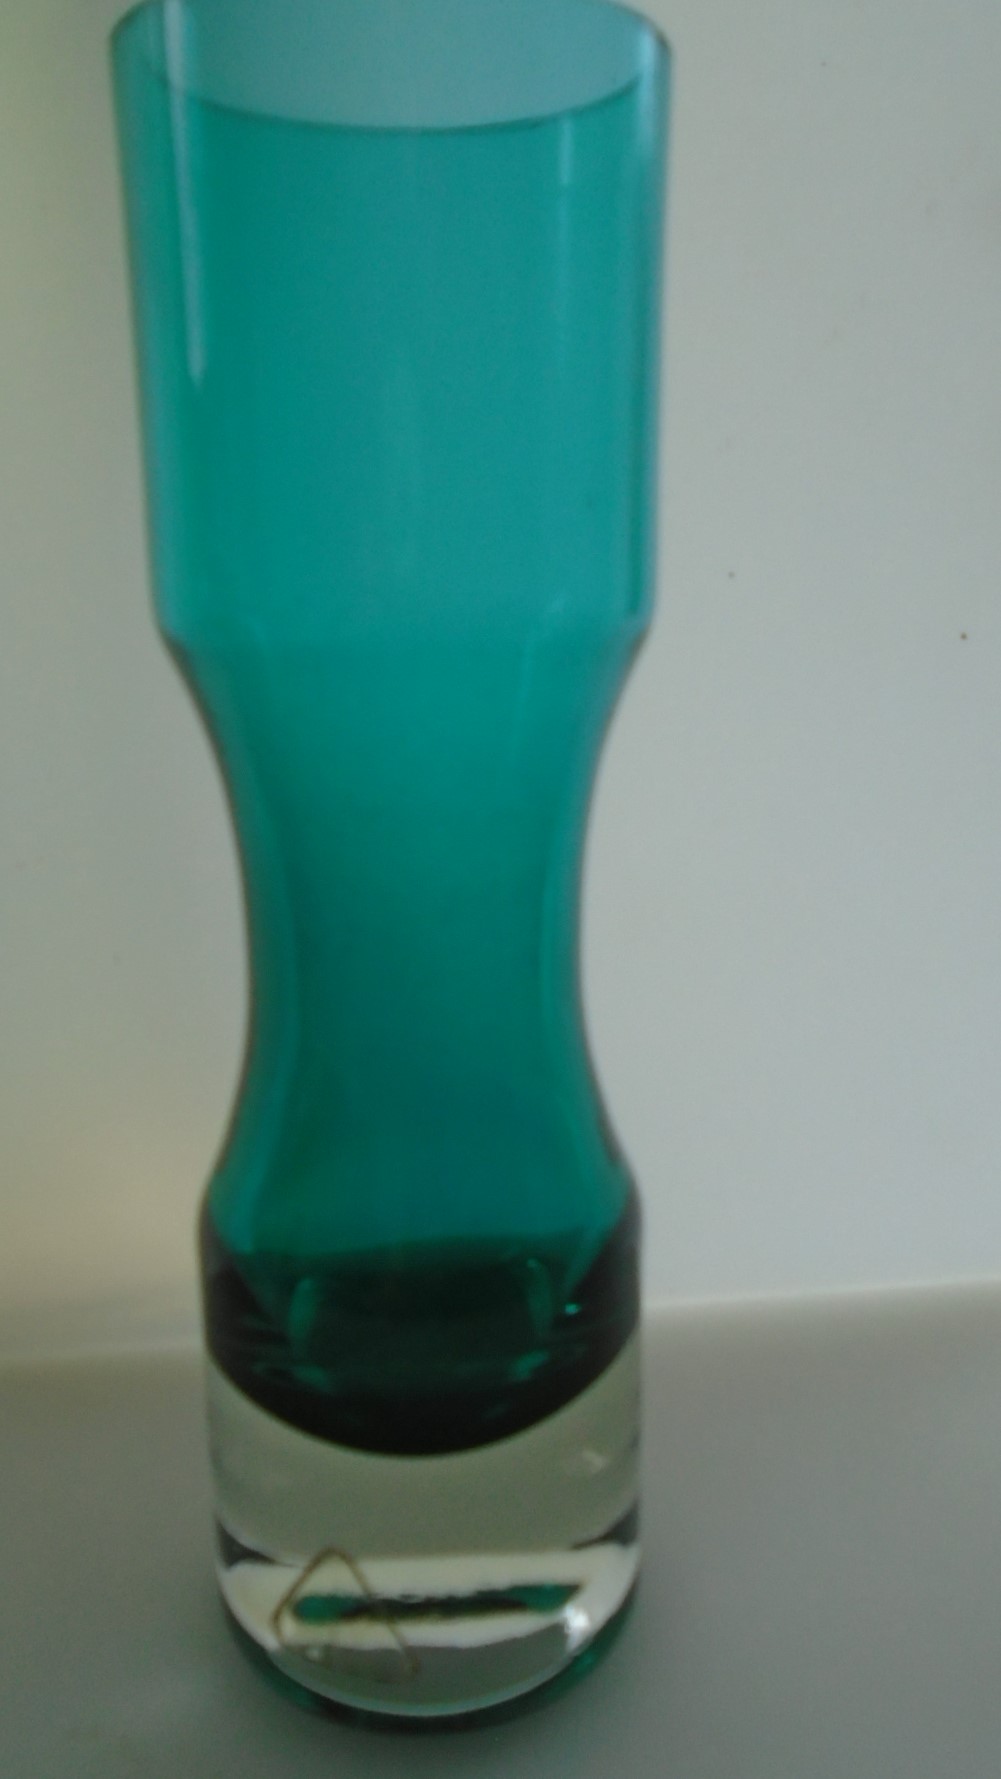 Offered for sale is an attractive less seen example of a small Riihimaki Lasi Vase in Turquoise Glass encased in clear